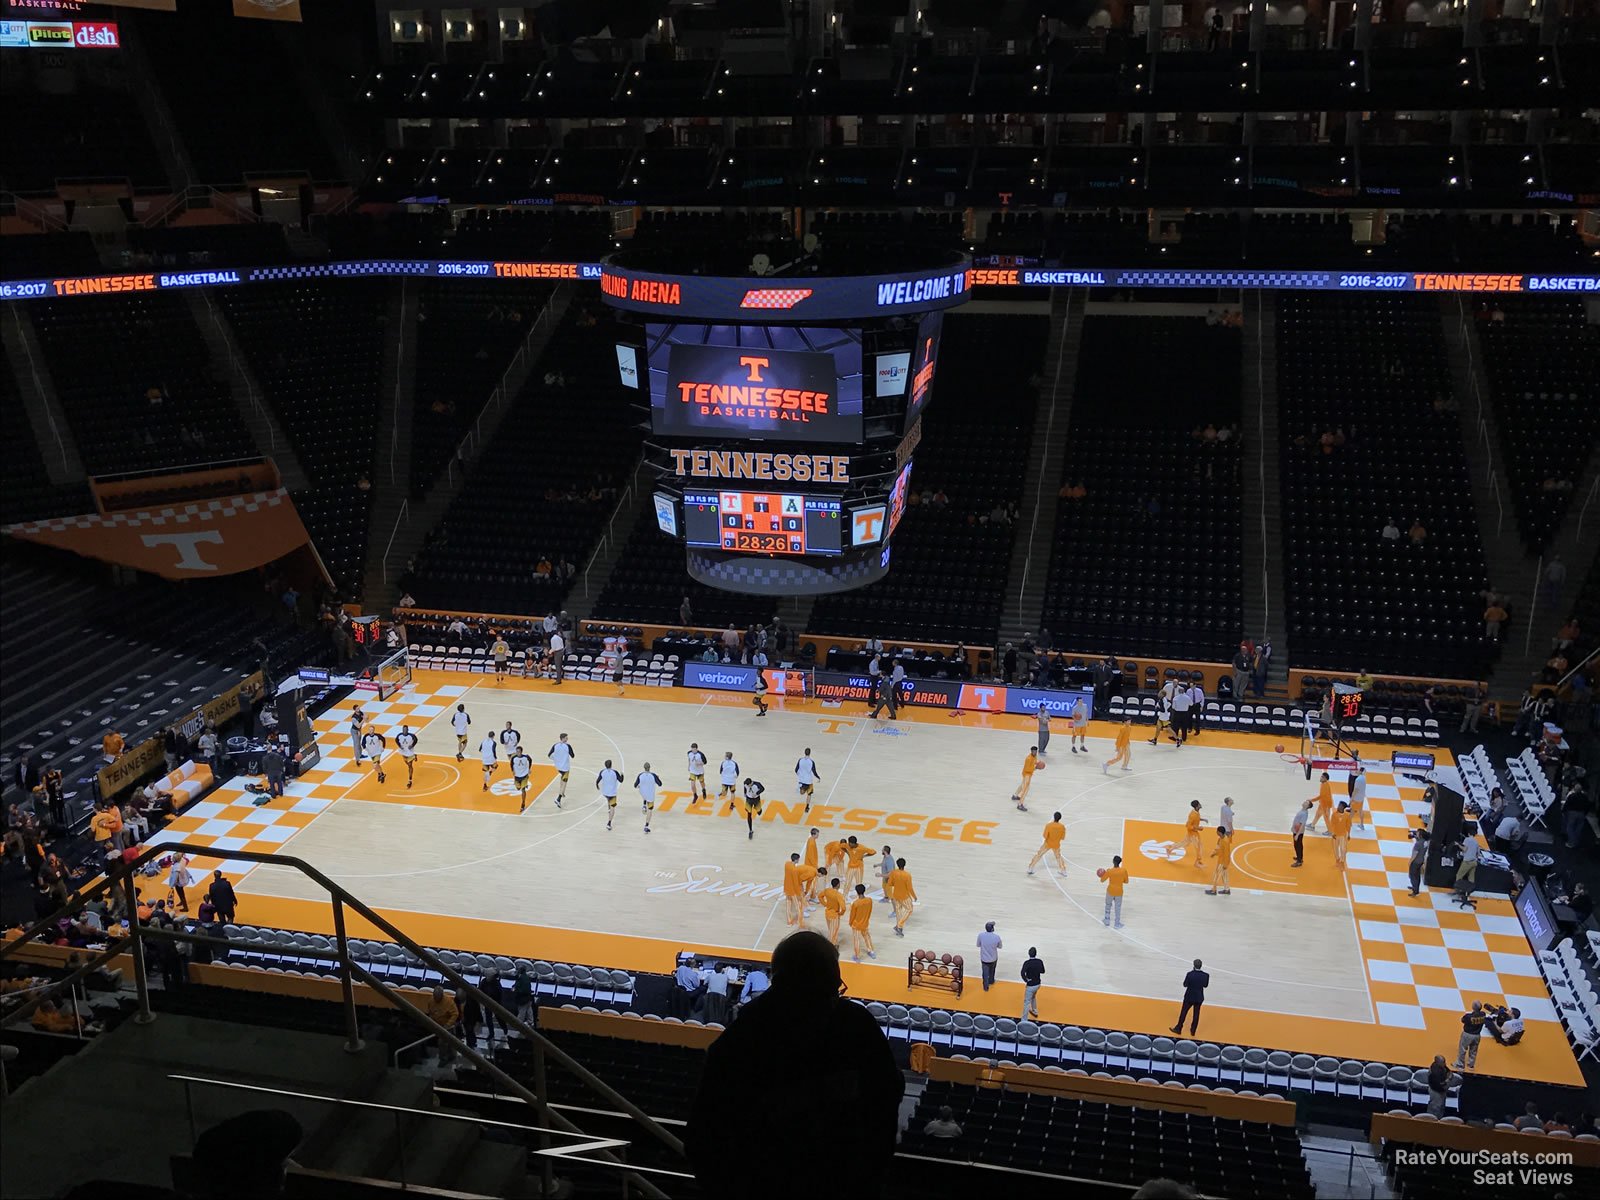 section 320, row 7 seat view  - thompson-boling arena